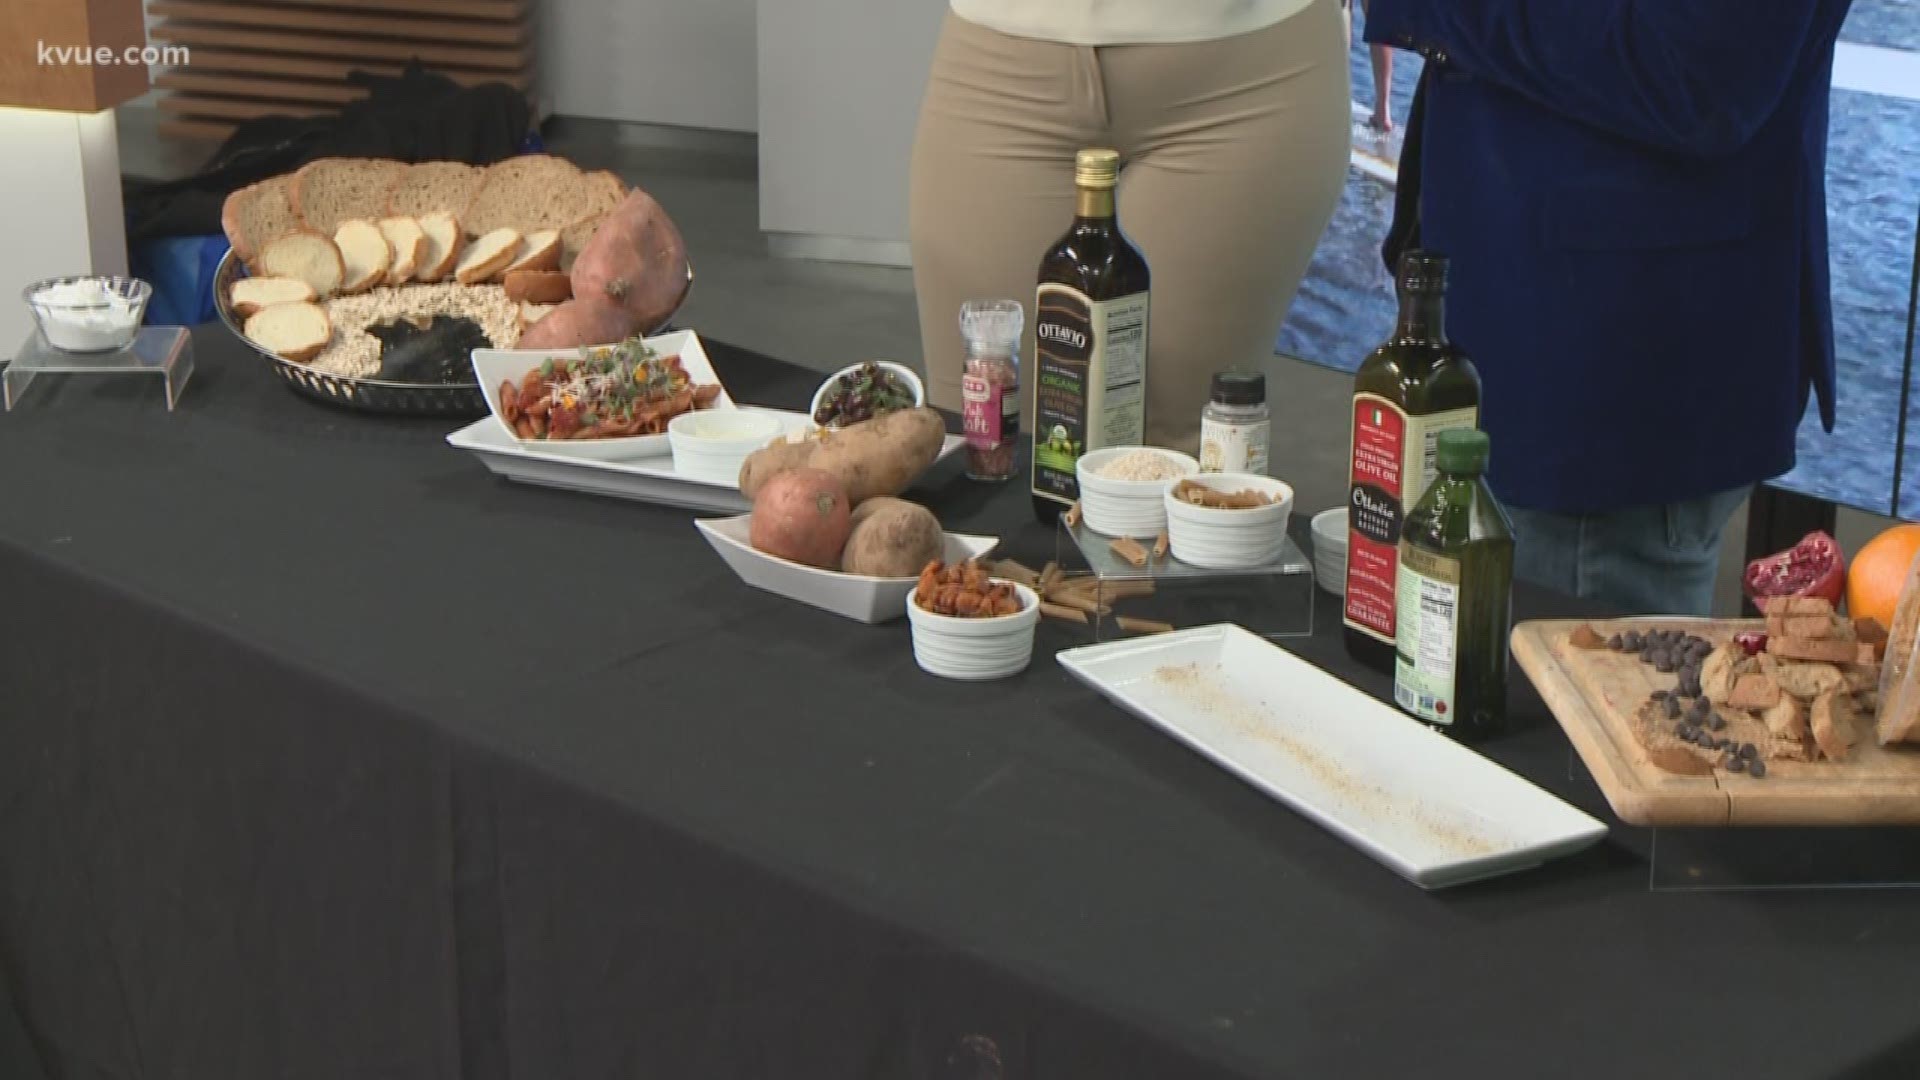 Tuesday is National Diabetes Day. Chef Adrian Perez stopped by KVUE to share some tasty but healthy recipes.